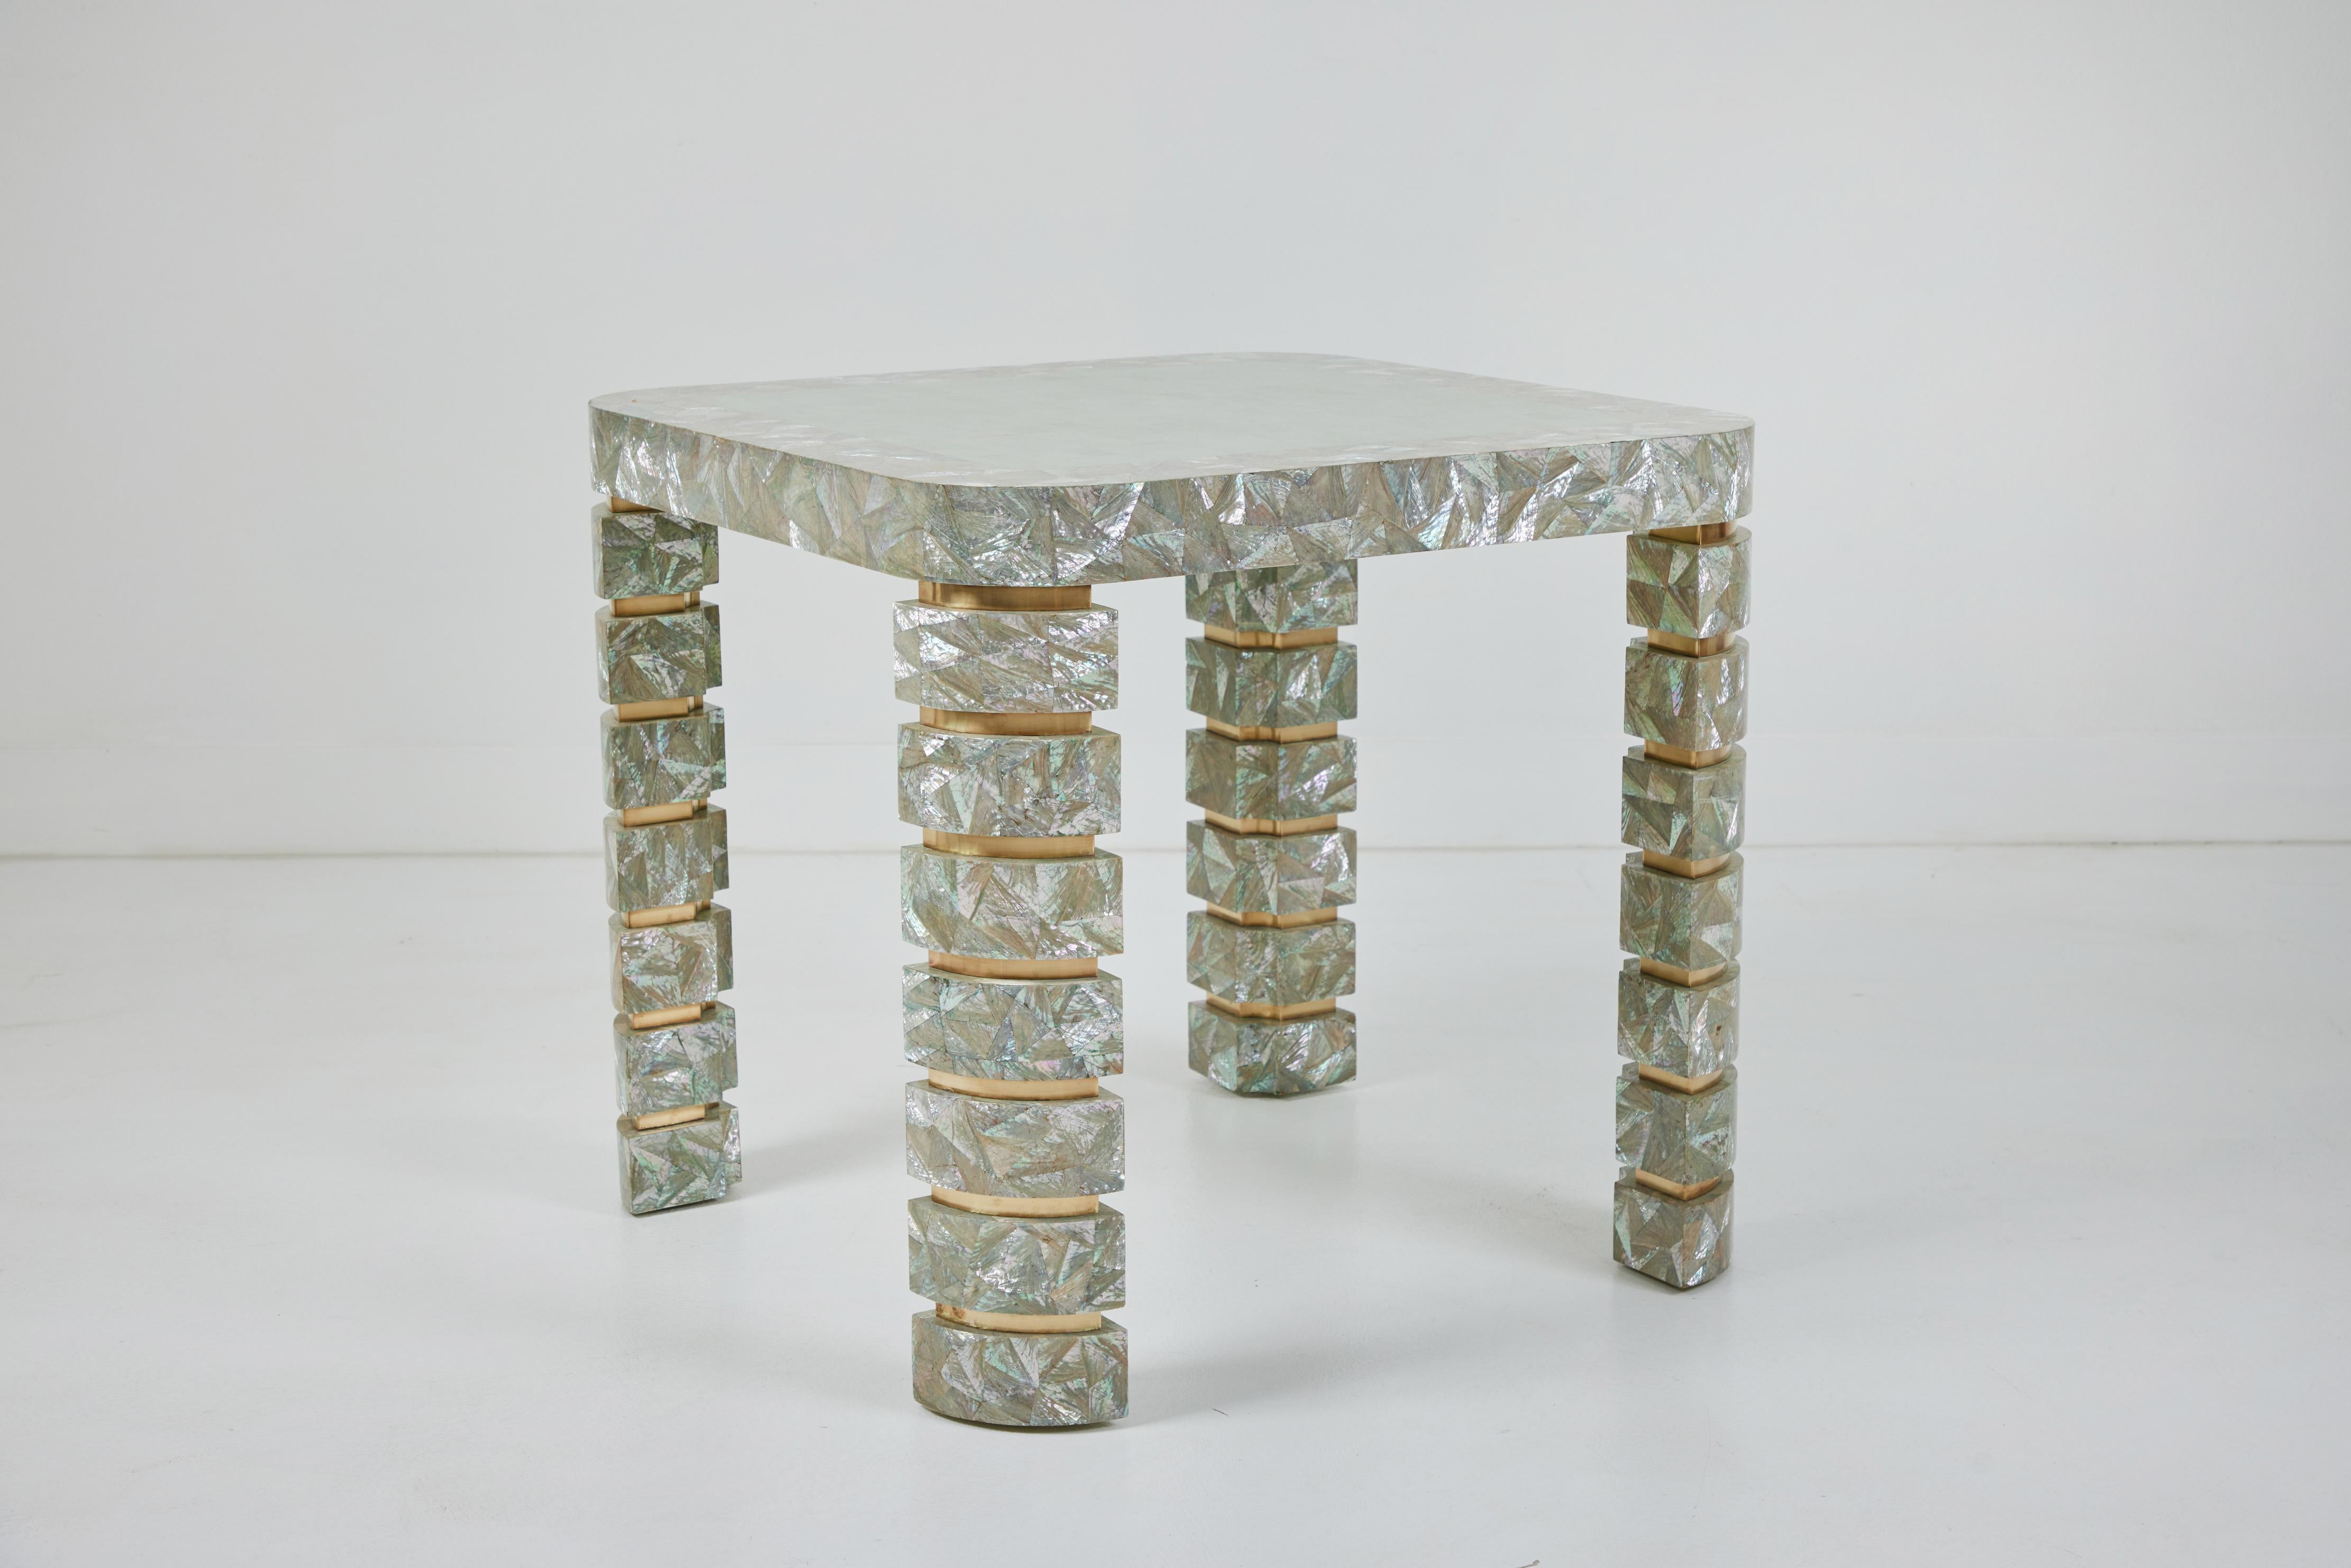 This is a stunning table great as a game table or small dining table most likely designed and made by Maitland Smith. Smith's style is reflected in the use of tessellated natural materials. The table top features tessellated stone surrounded by